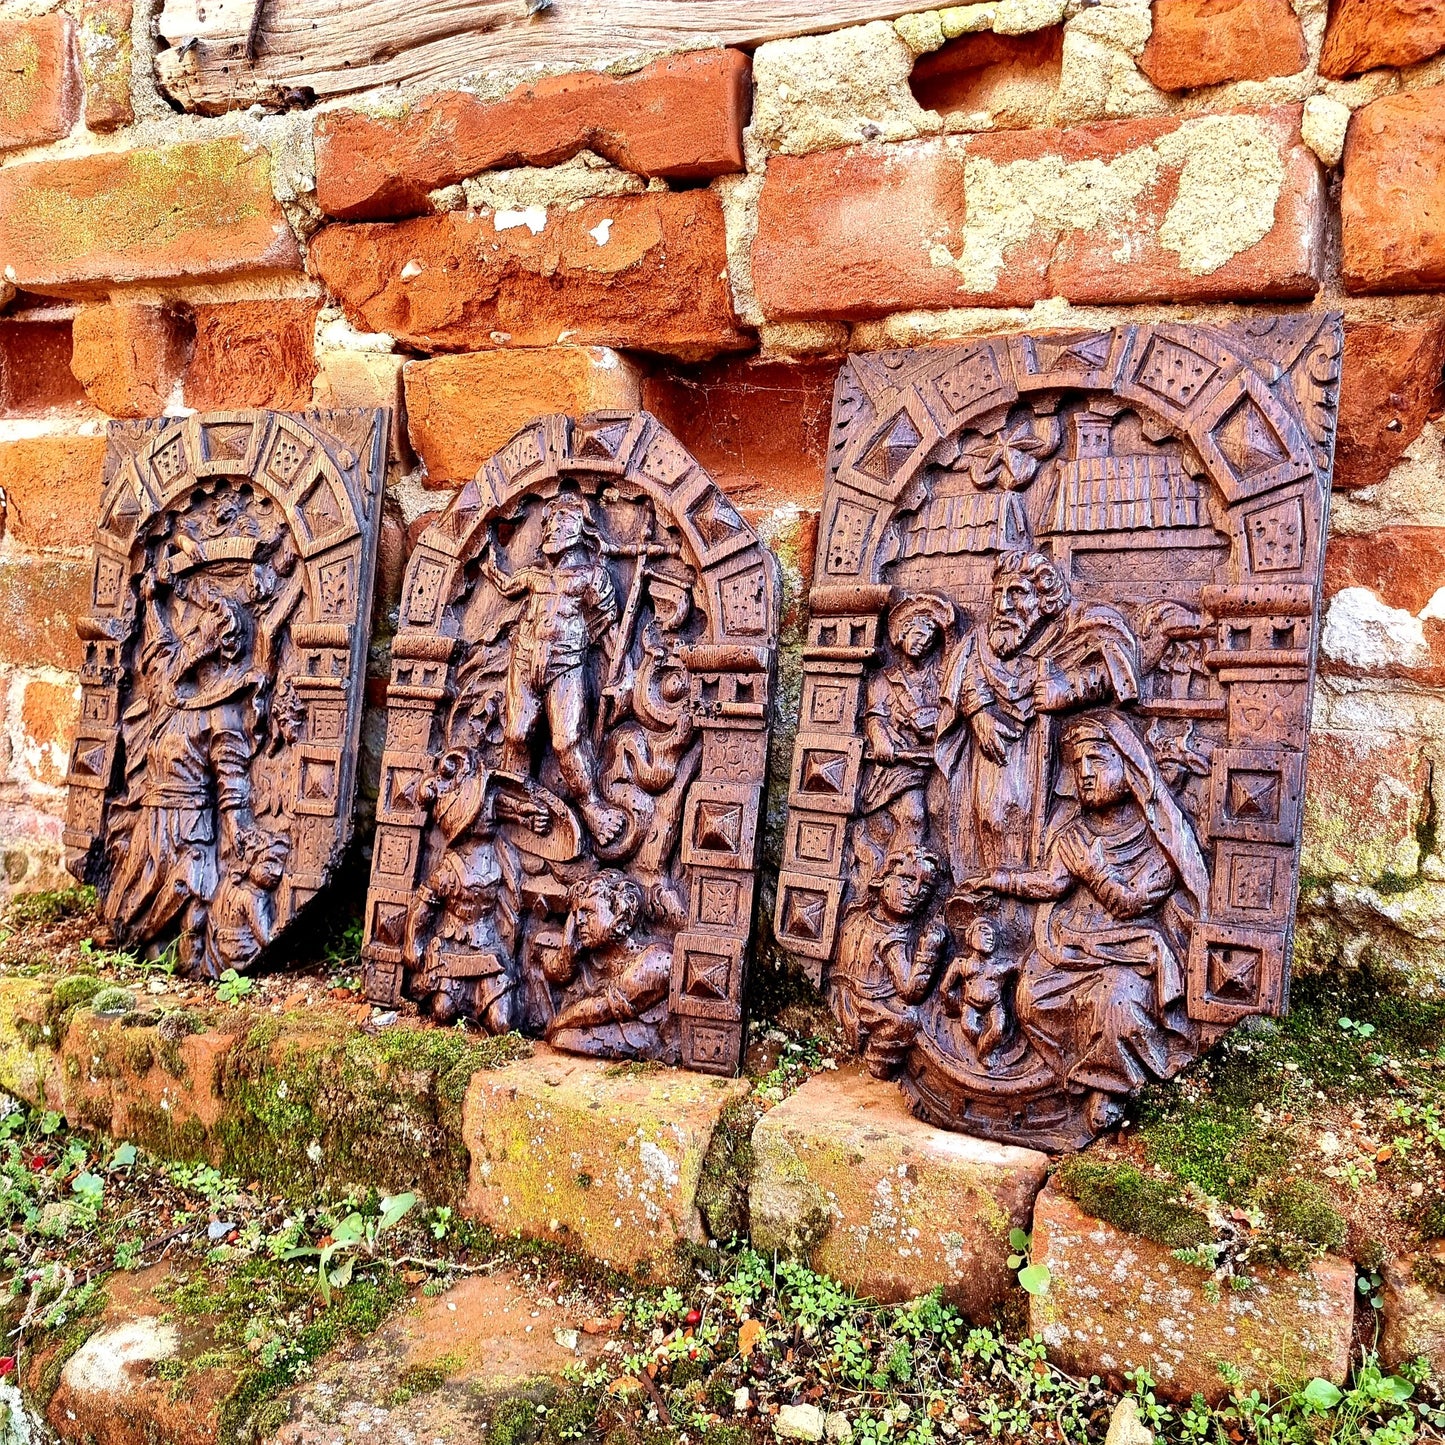 Set of 3 x Early 17th Century Flemish Antique Carved Oak Panels Including The Nativity, The Arrest of Jesus and The Resurrection